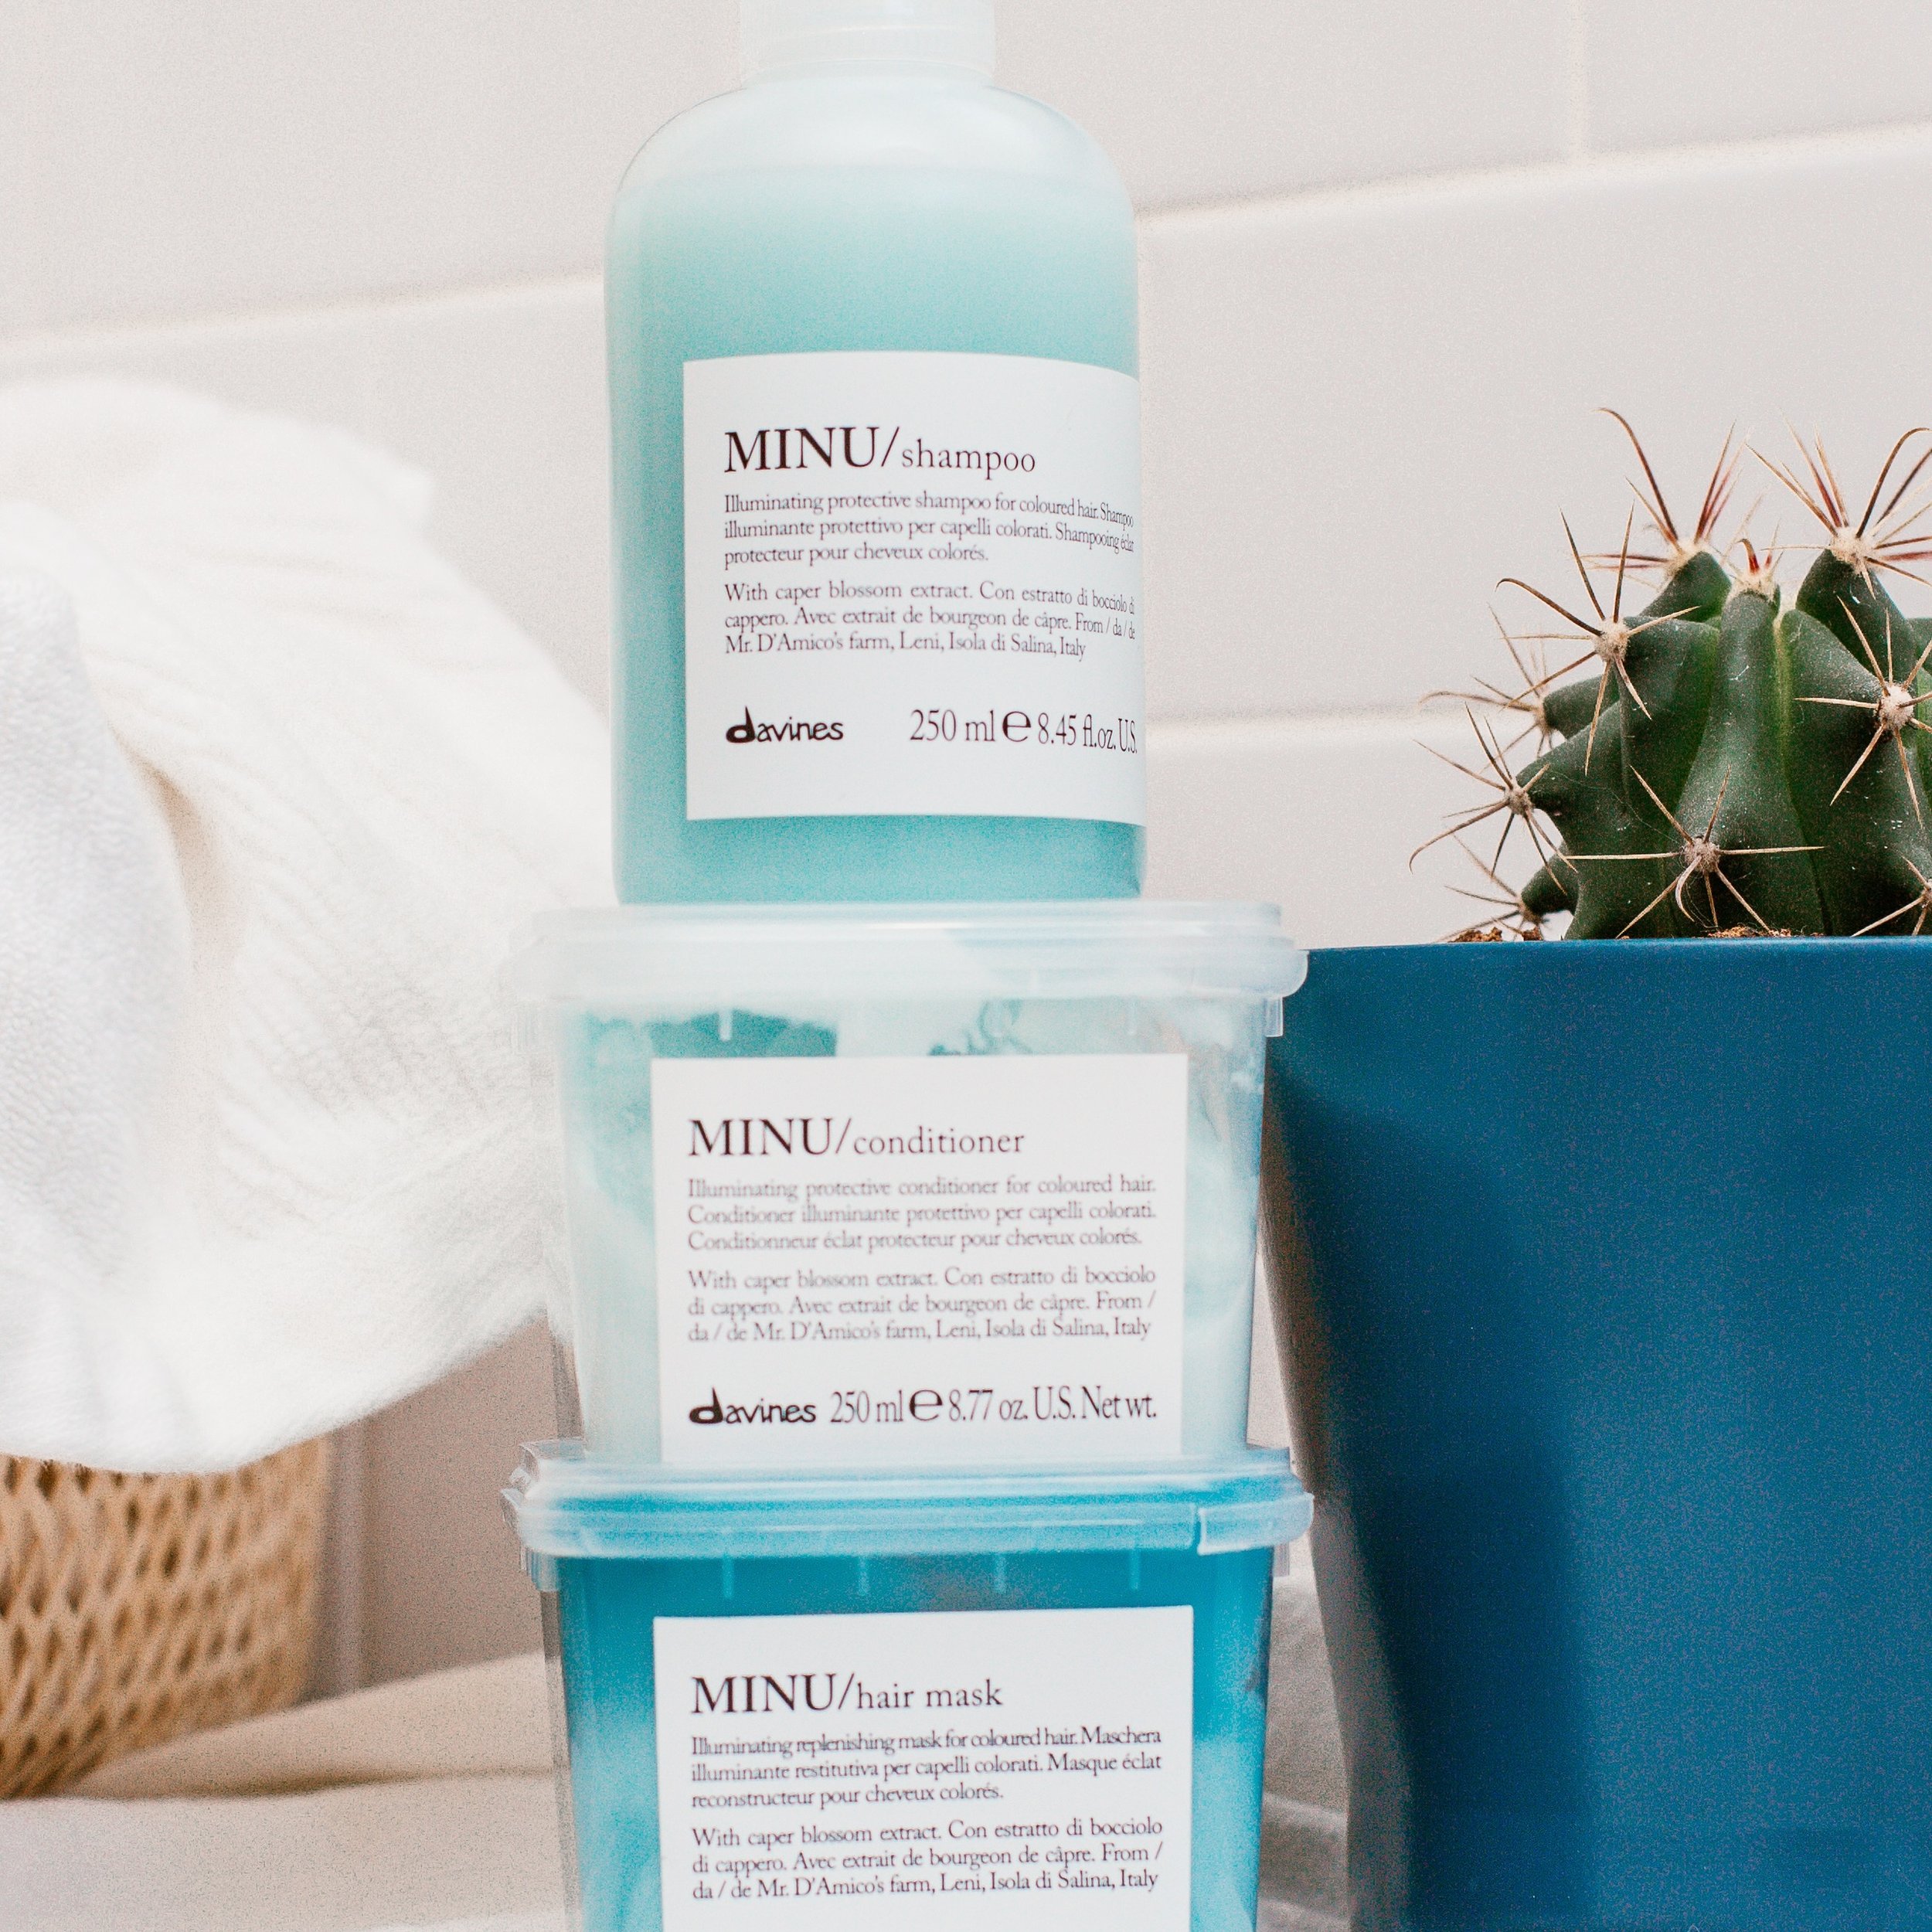 Meet the MINU family by Davines! 🌿 Prevent color fading before it starts with MINU Shampoo, Conditioner, and Hair Mask. 

Infused with Caper Blossom Extract, these products are designed to enhance and protect colored hair, leaving it beautifully lum